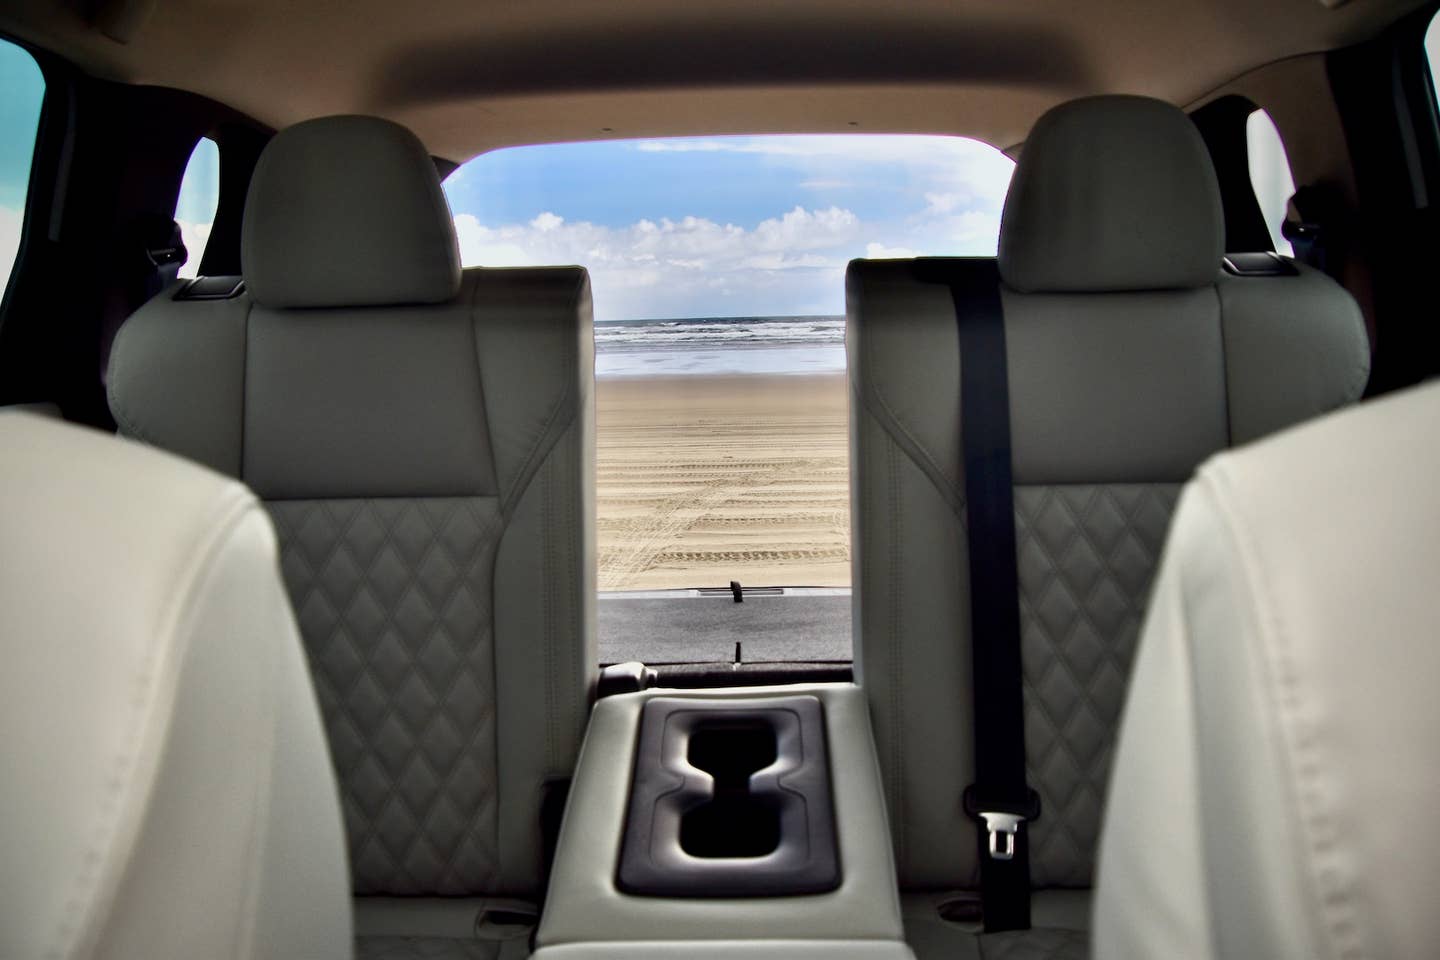 2023 Mitsubishi Outlander SEL S-AWC second row overlooking the ocean